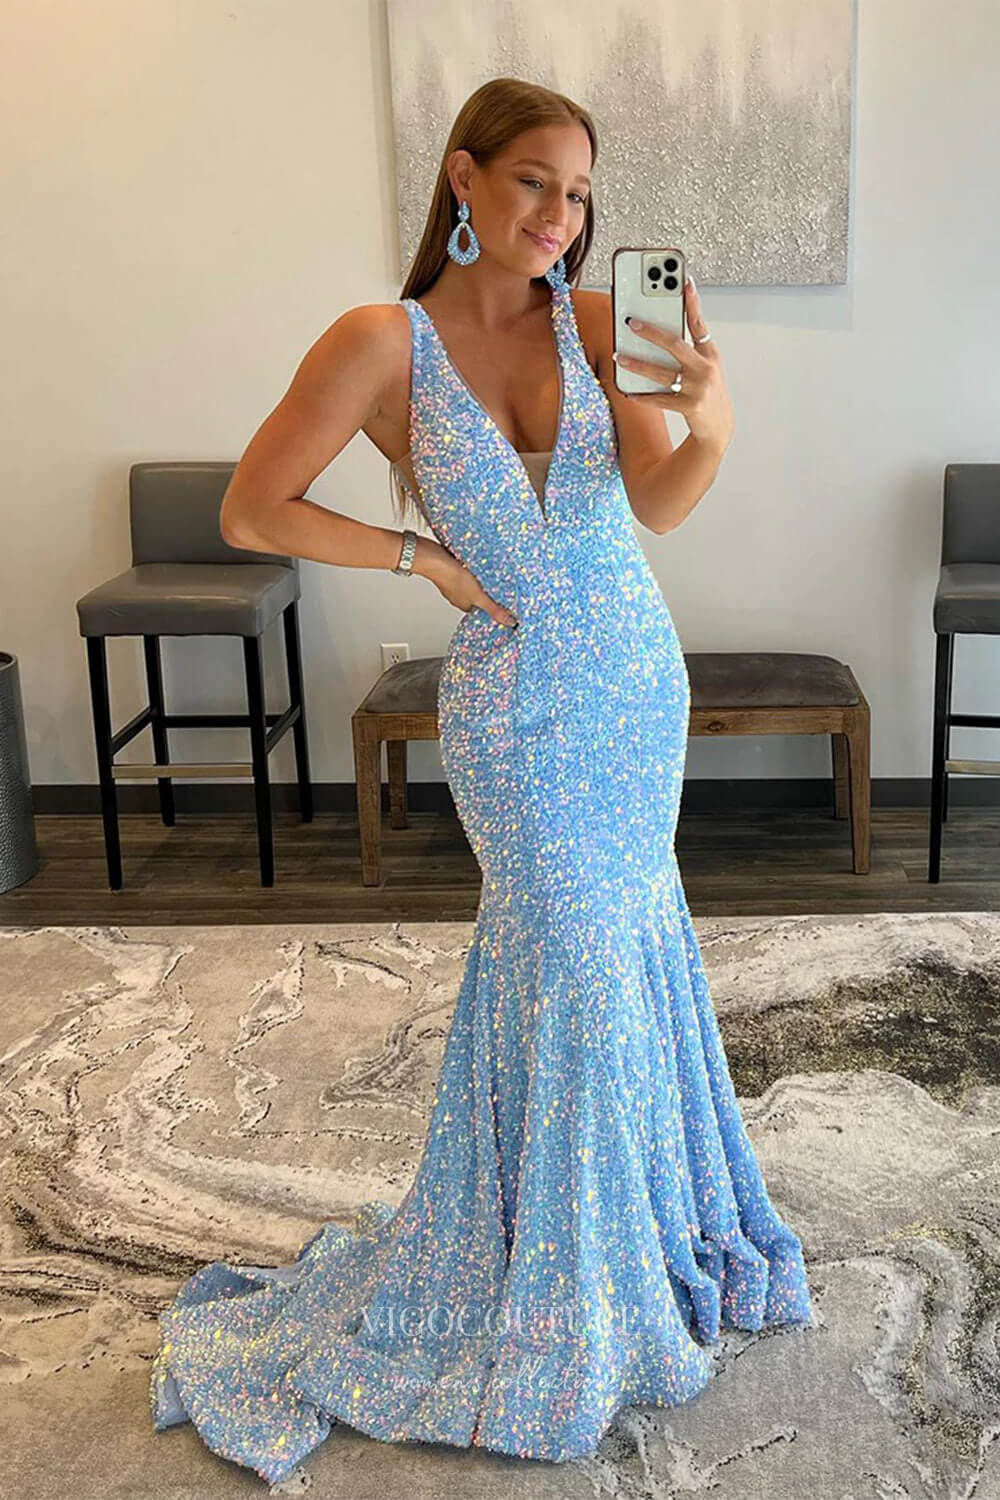 Pink Sequin Mermaid Prom Dresses Plunging V-Neck Evening Dresses 21587-Prom Dresses-vigocouture-Light Blue-US2-vigocouture